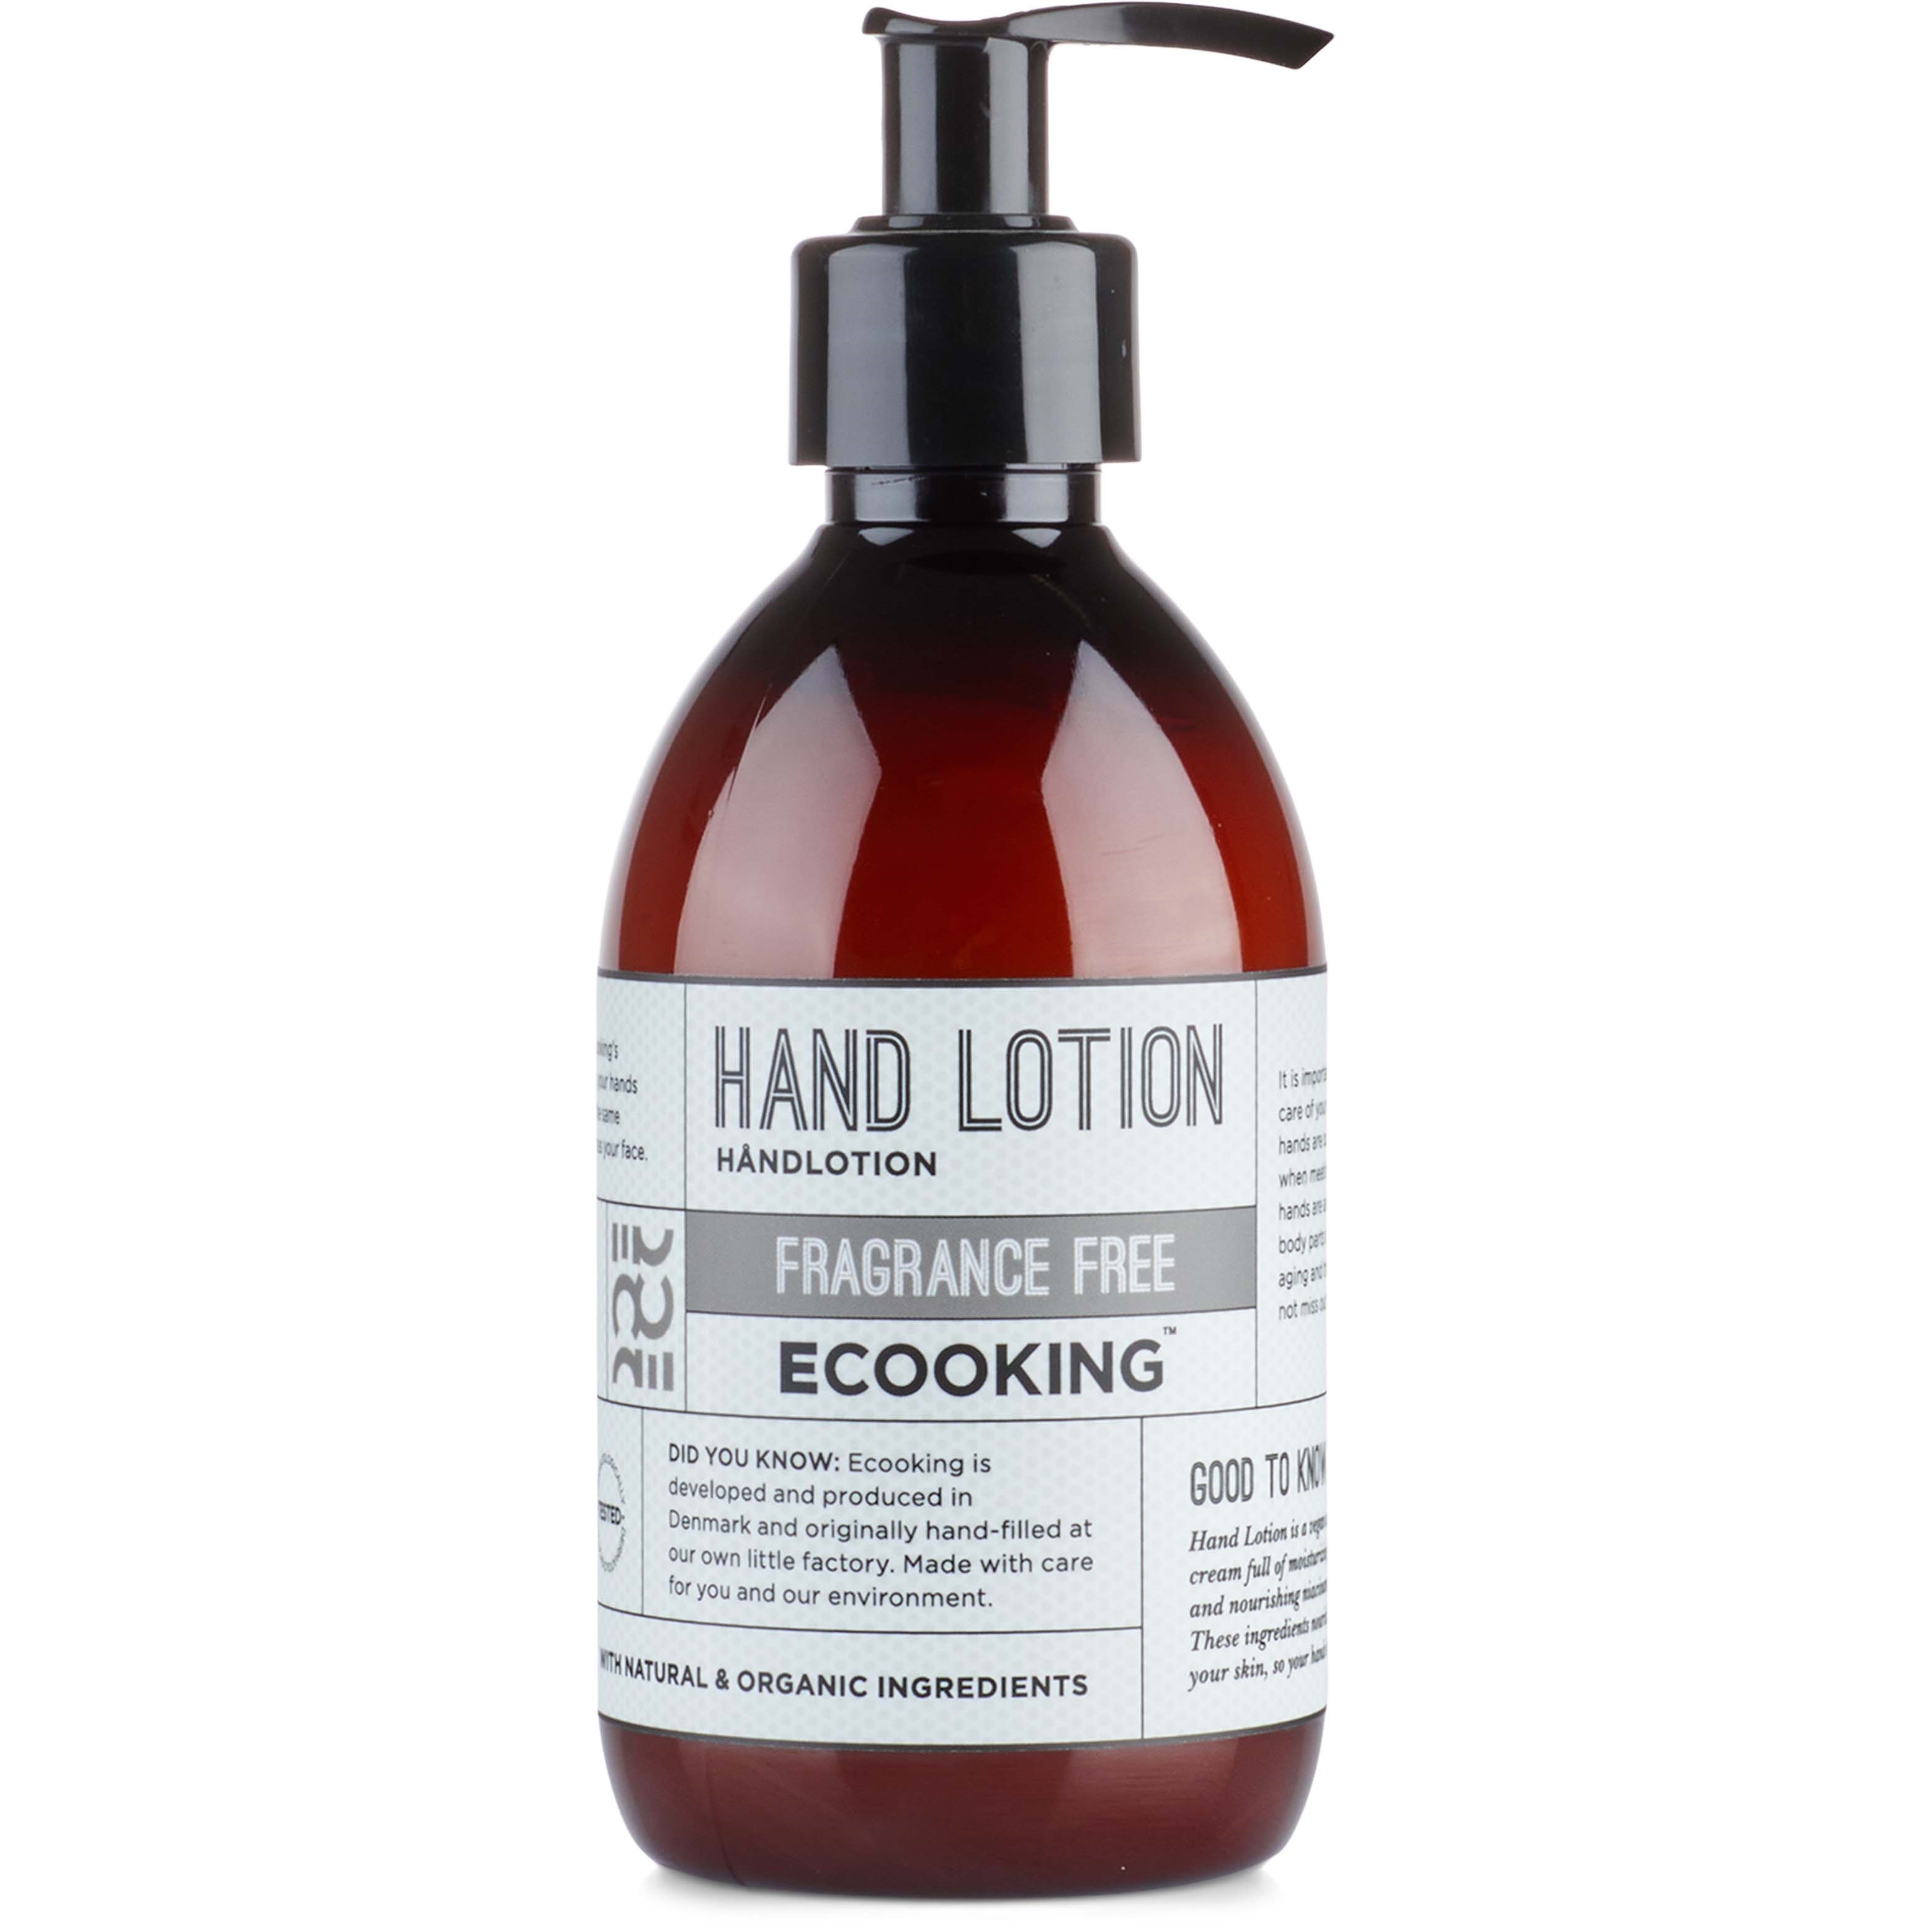 Ecooking Bodycare Hand Lotion Fragrance Free 300 ml